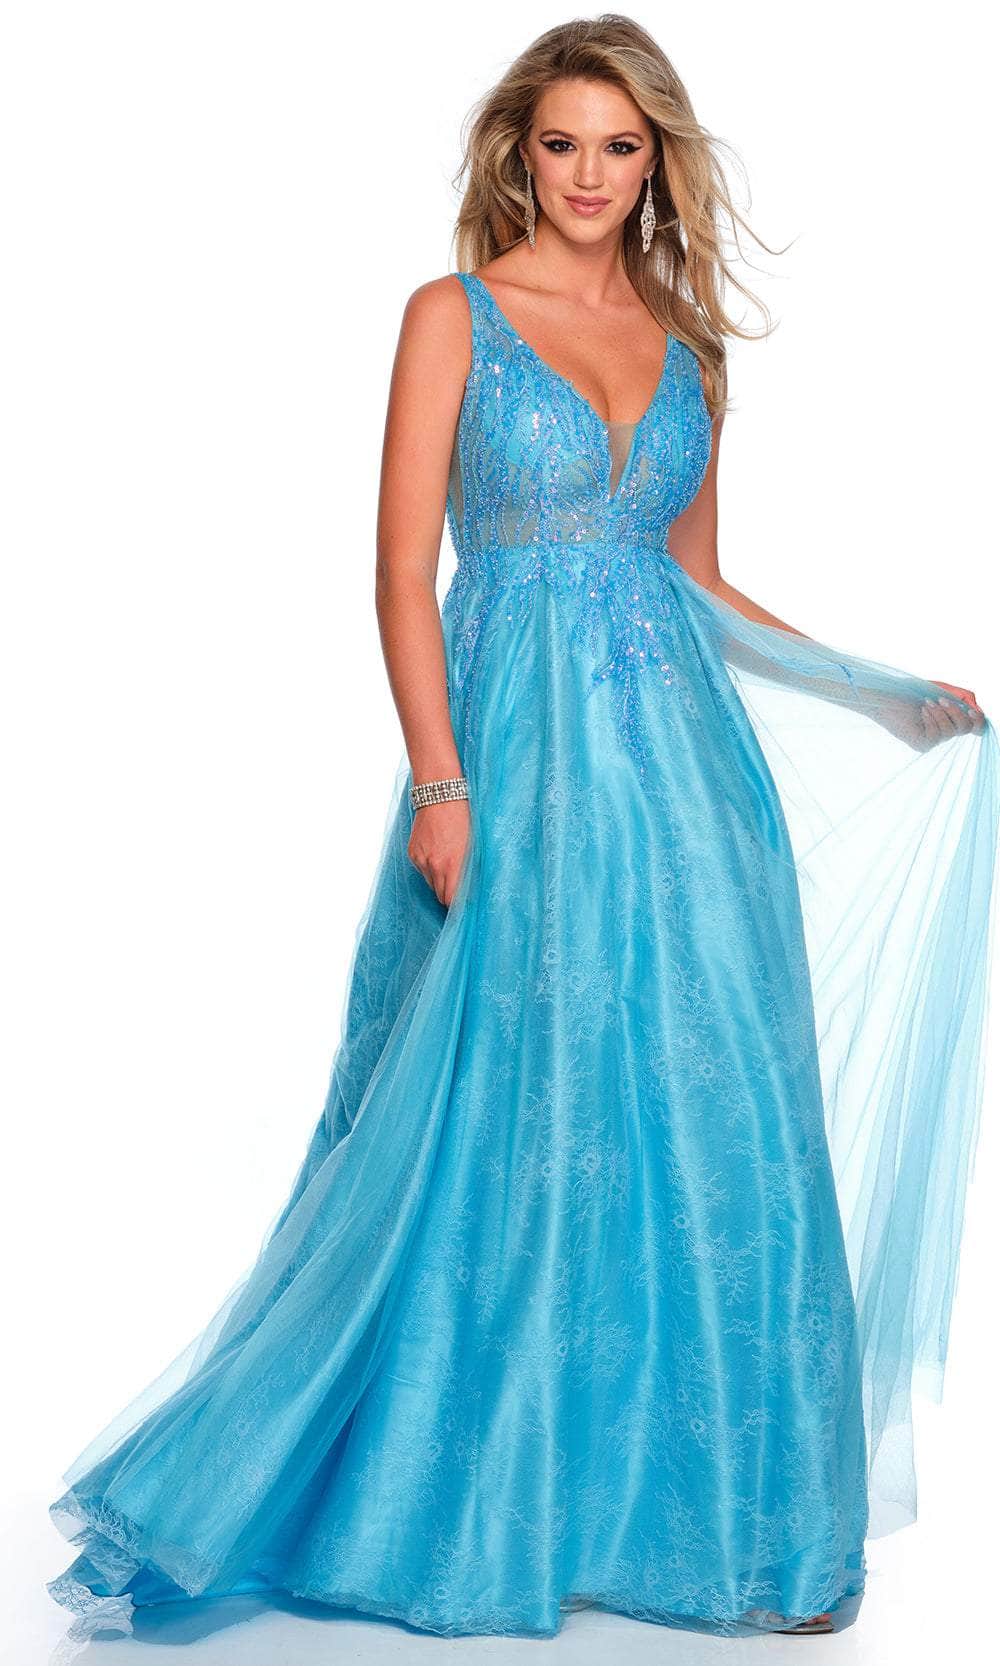 Dave & Johnny 11377 - Embroidered Sleeveless Ball Gown
